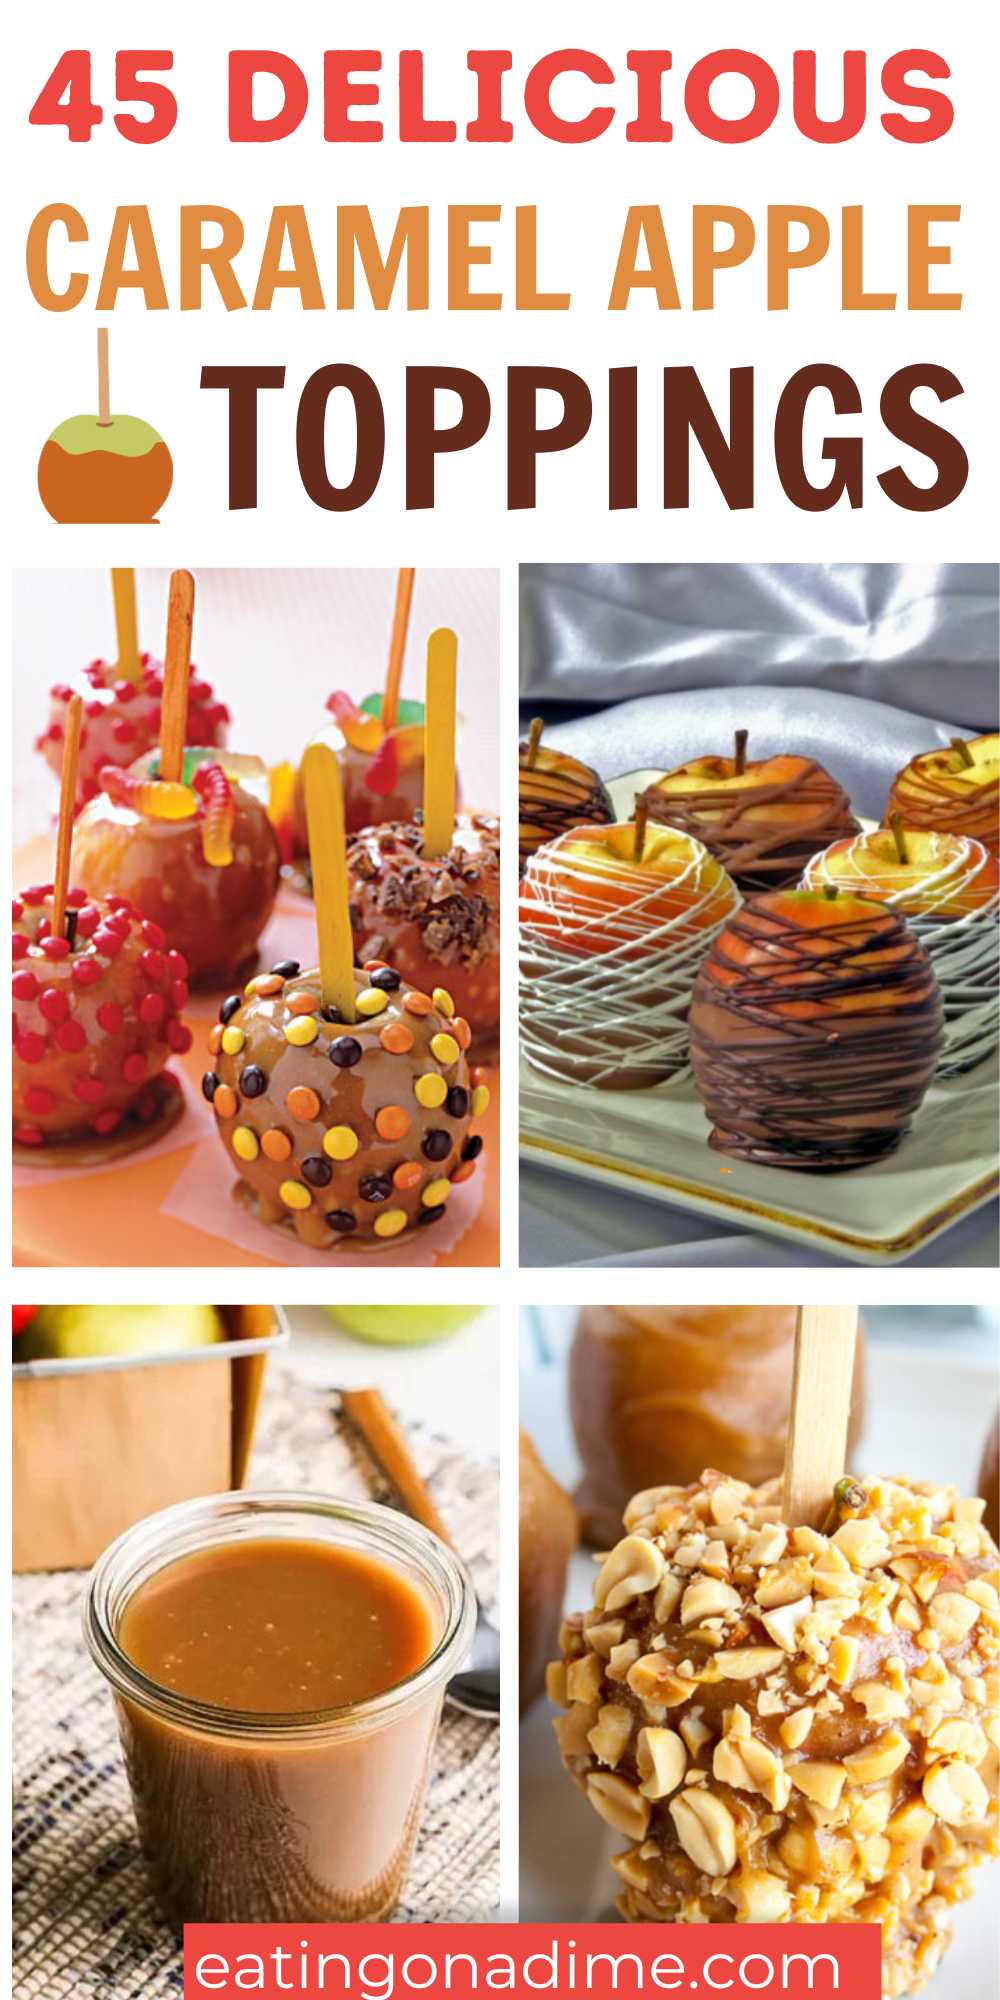 Satisfy your sweet cravings with these caramel apple toppings. We’ve rounded up the 45 best caramel apple toppings perfect for any occasion. Whether it’s for Thanksgiving or Halloween, these toppings for caramel apples are incredibly delicious. Choose from all these toppings and you will absolutely find your favorite. #eatingonadime #caramelappletopping #caramelapple